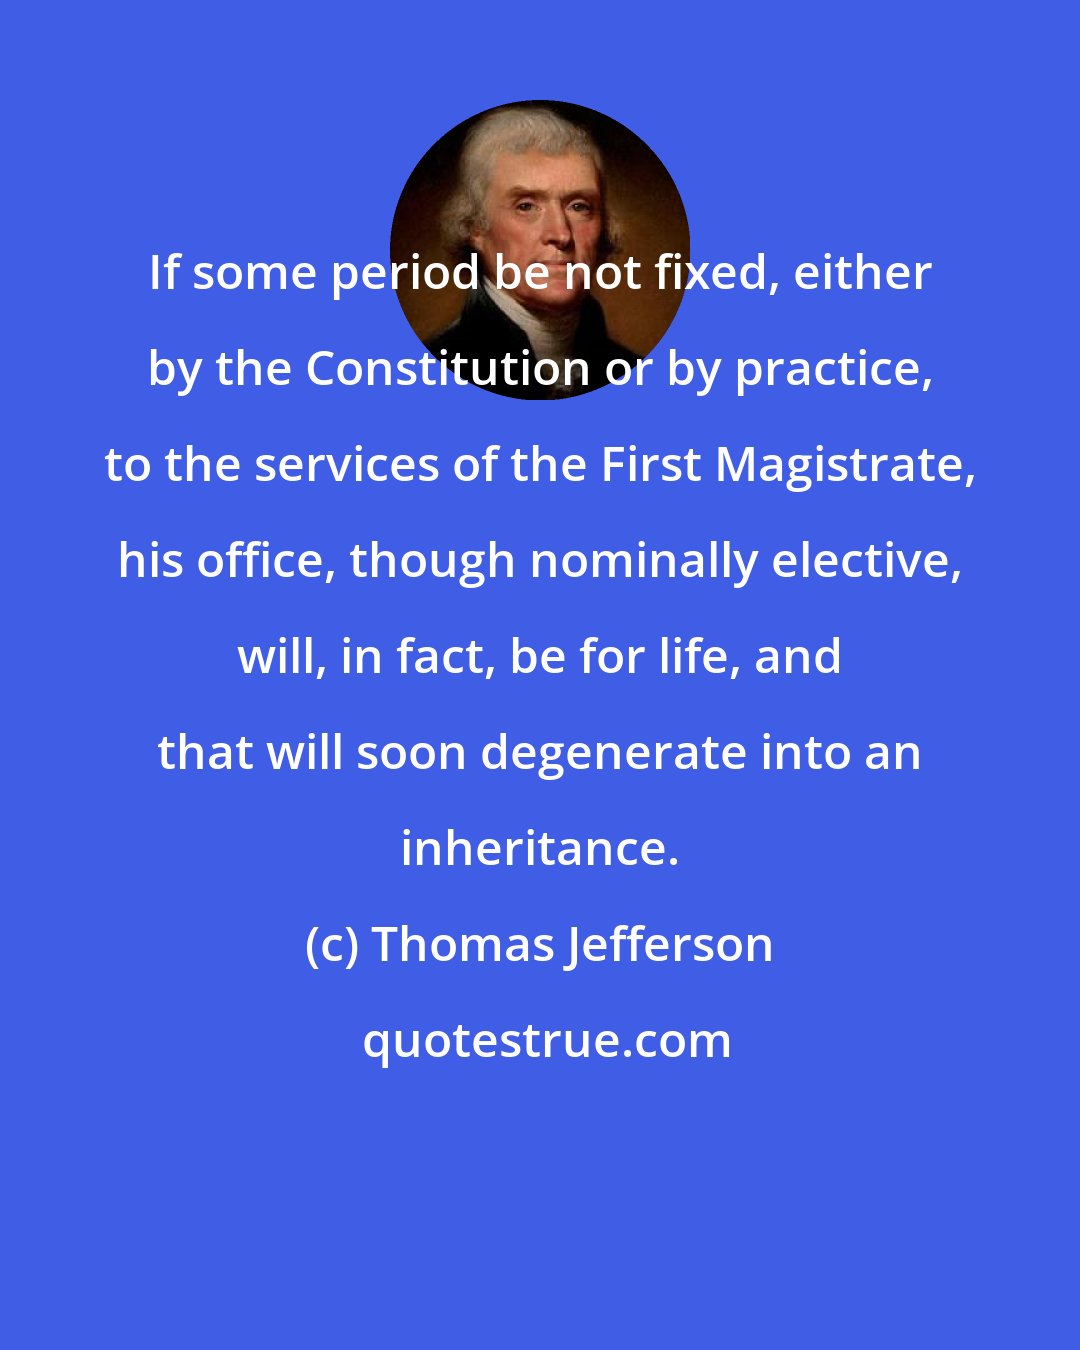 Thomas Jefferson: If some period be not fixed, either by the Constitution or by practice, to the services of the First Magistrate, his office, though nominally elective, will, in fact, be for life, and that will soon degenerate into an inheritance.